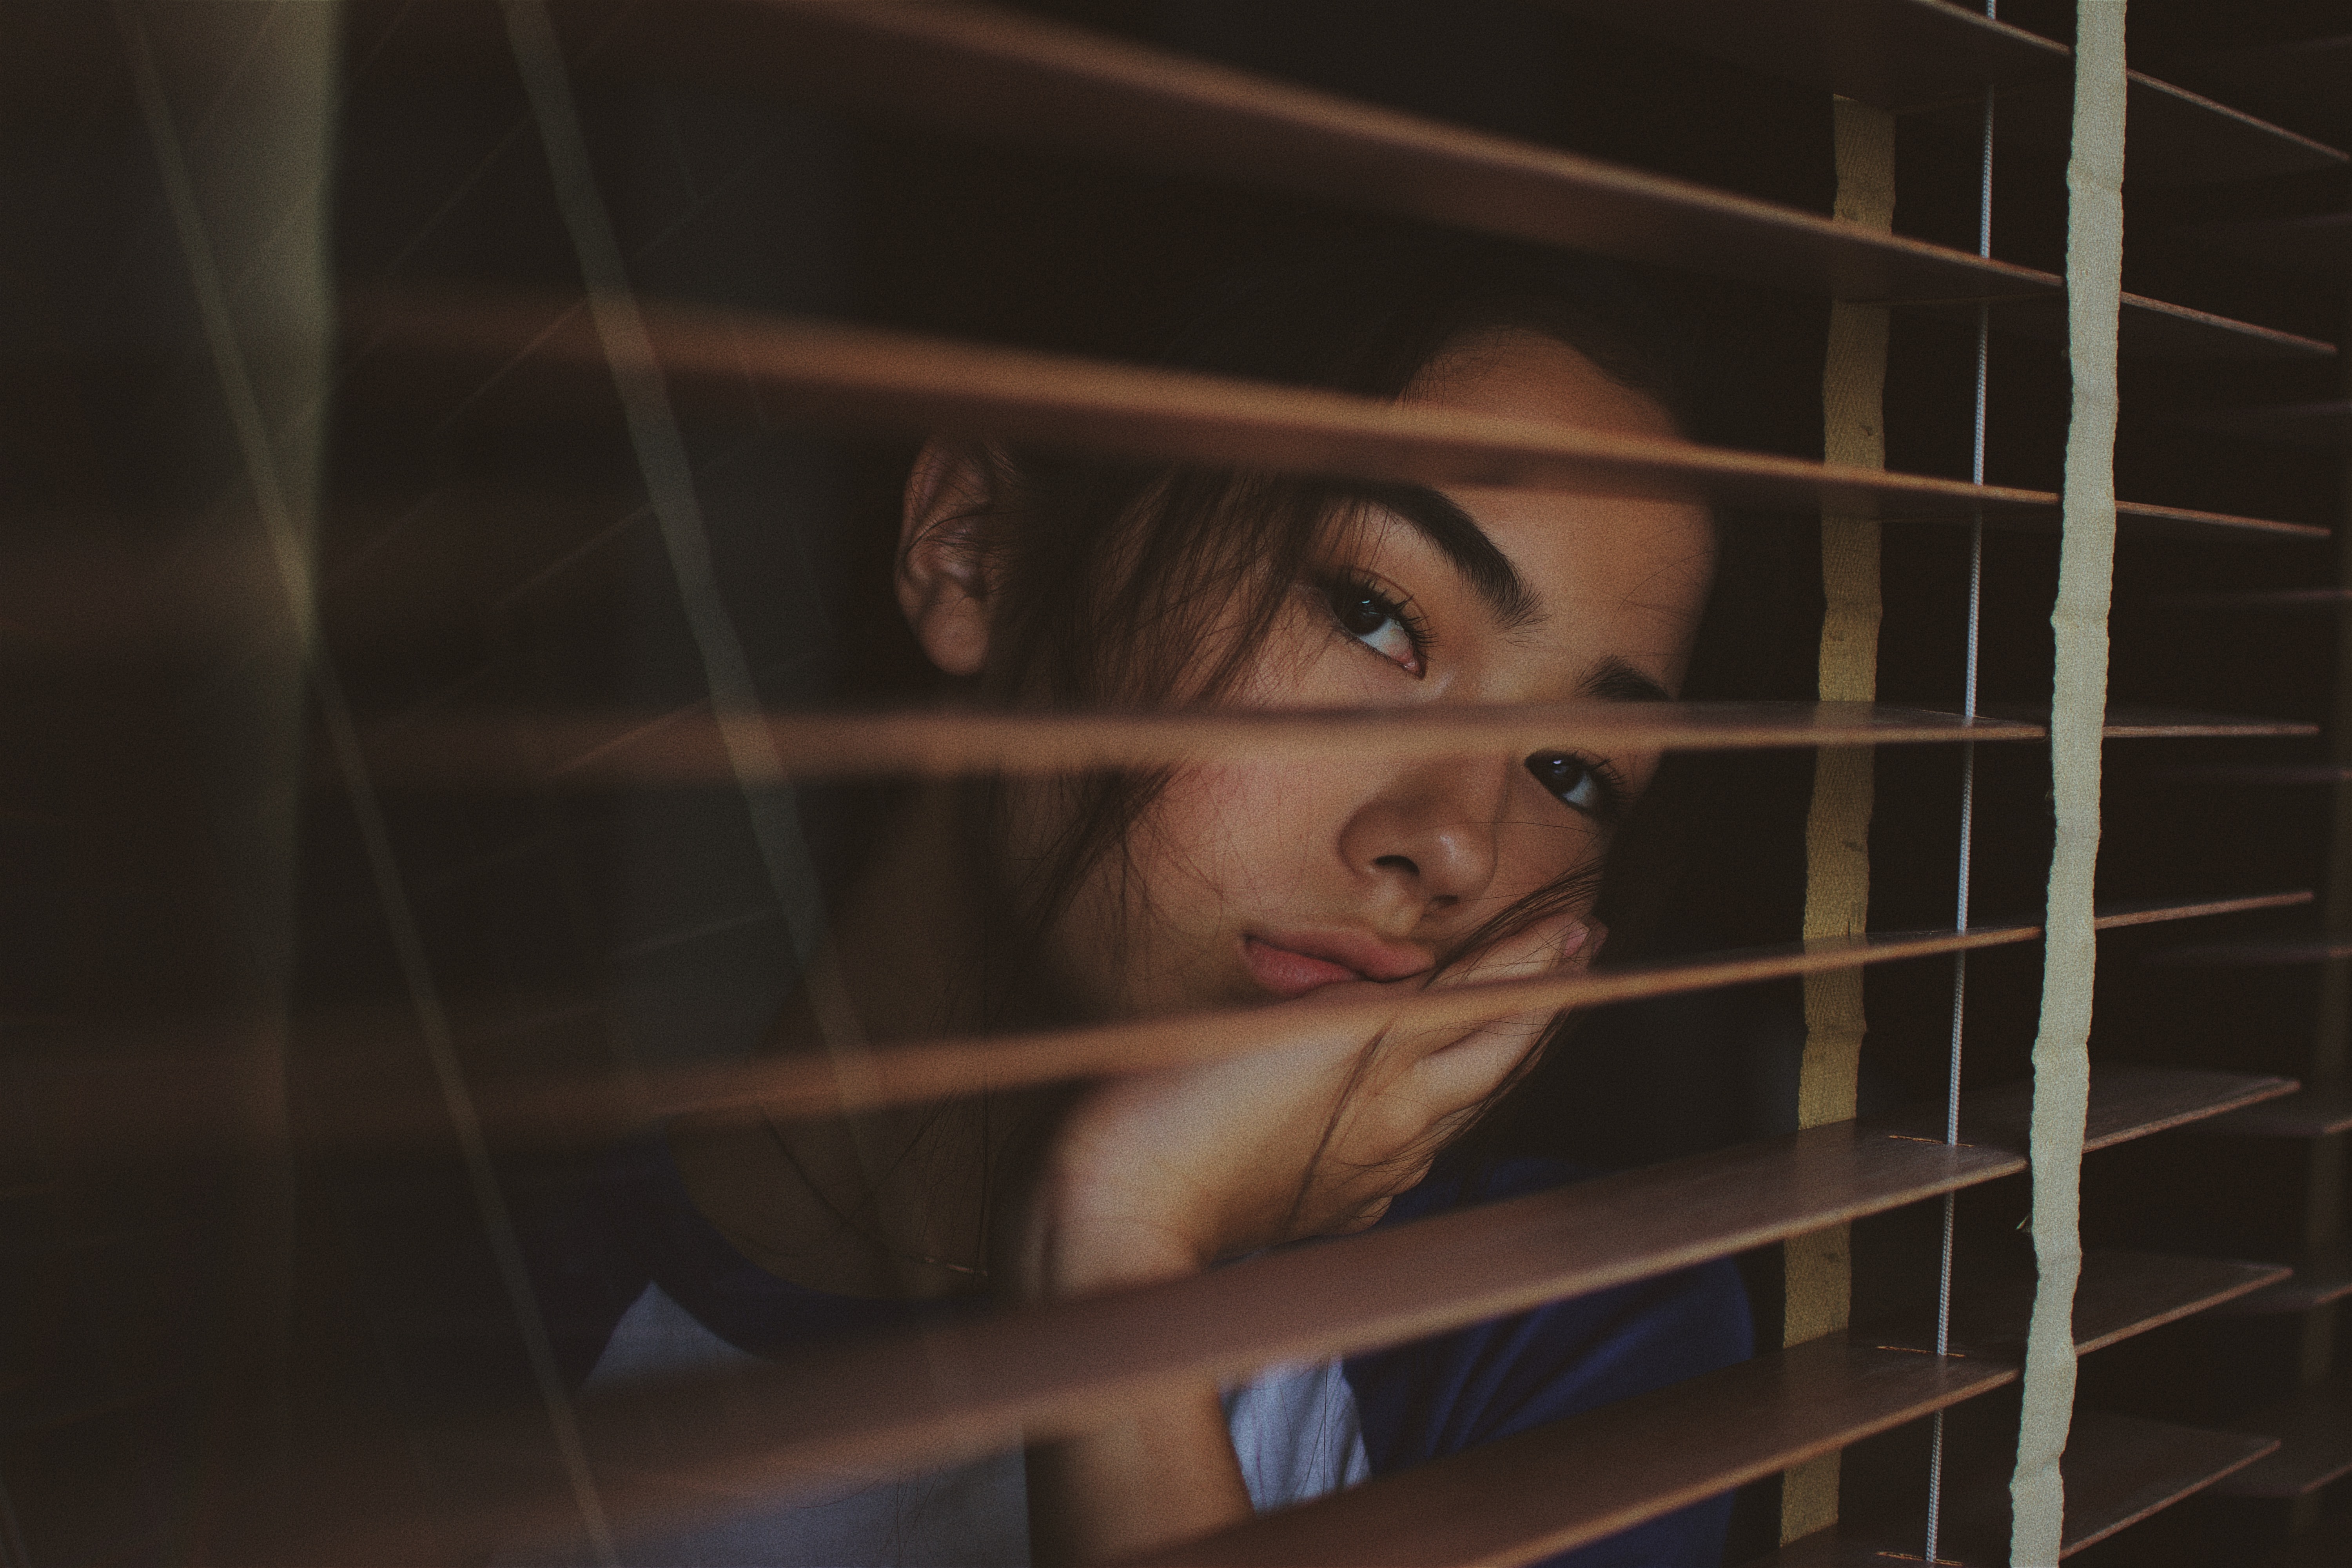 Half of educators don't feel adequately prepared to recognize signs of trauma in students. Photo by Joshua Rawson-Harris on Unsplash